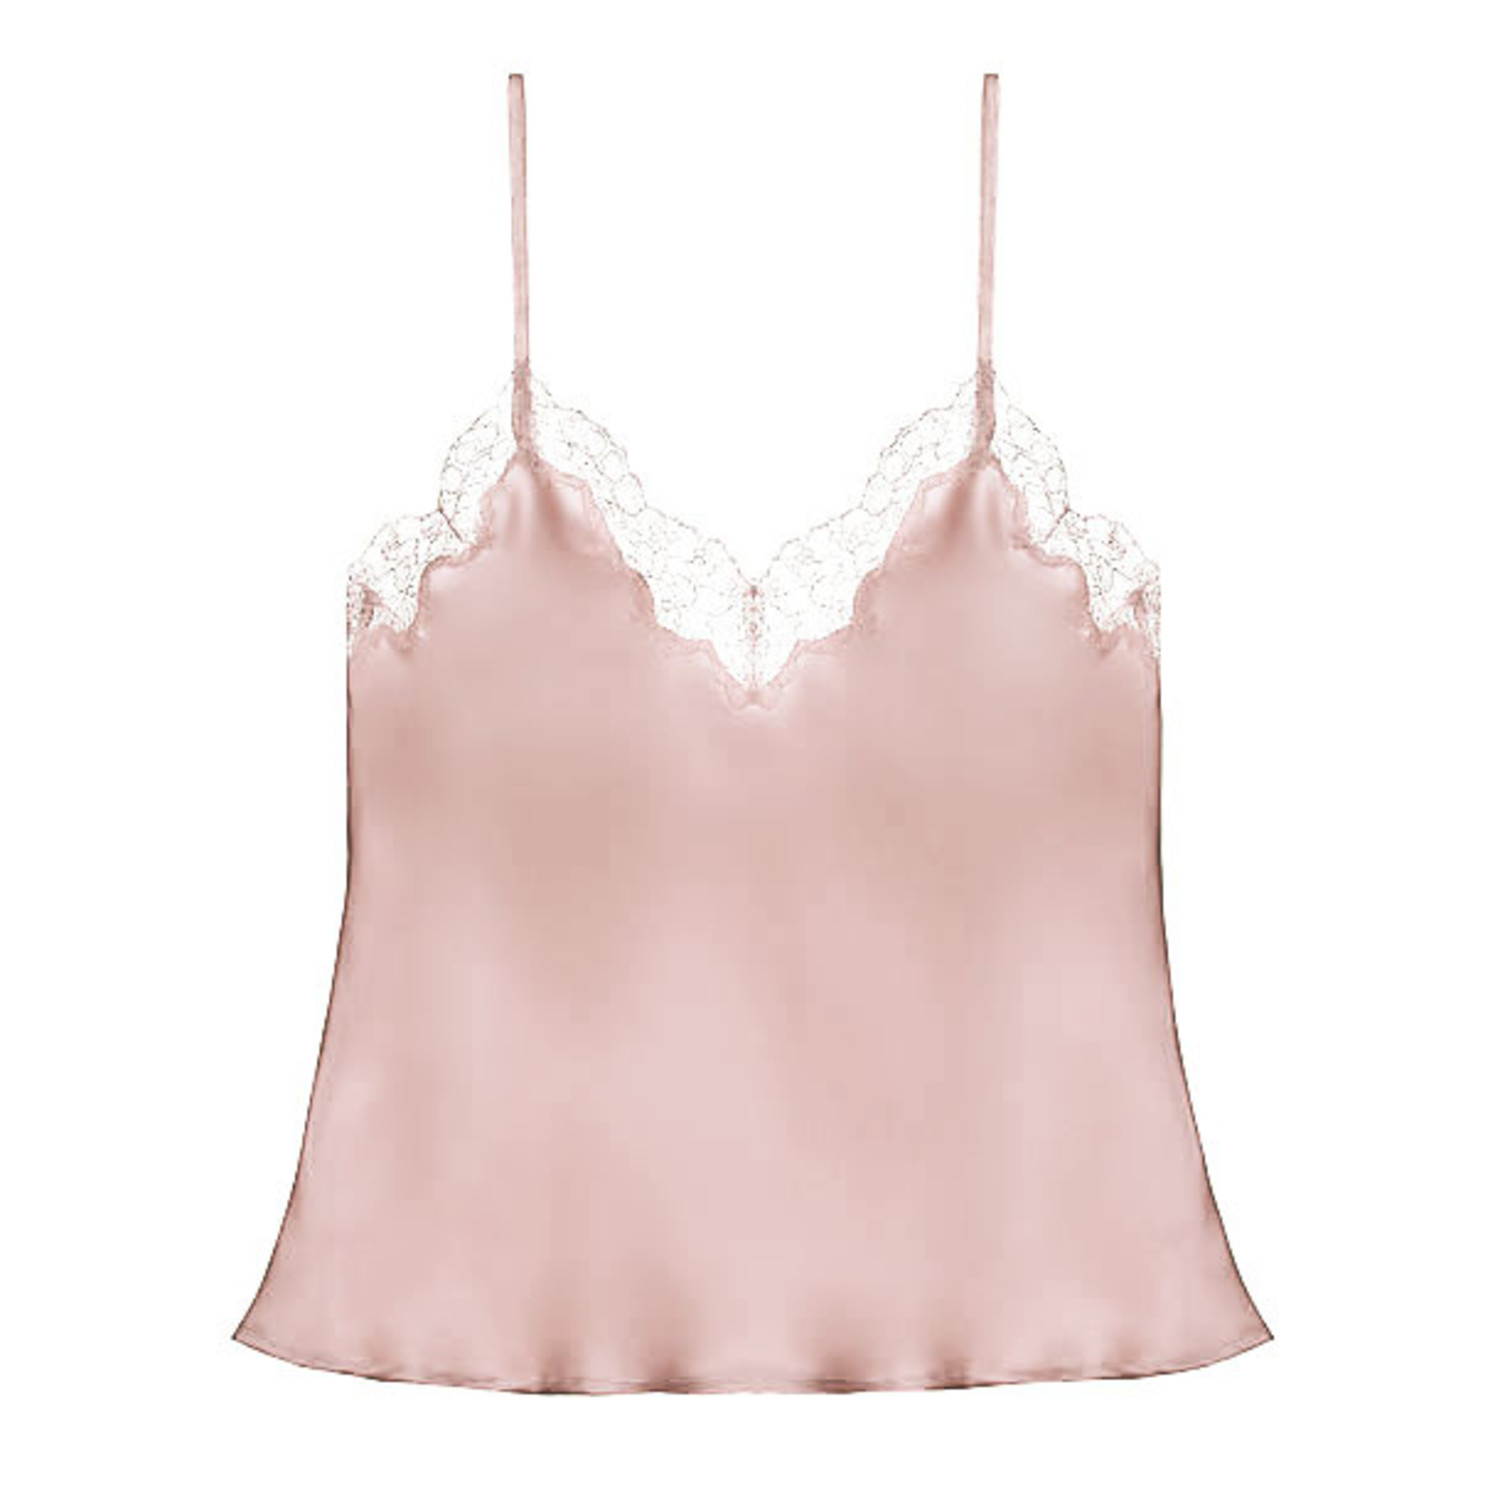 SHYLE BABY PINK FULL LACE ADJUSTABLE STRAP TRANSPARENT CAMISOLE